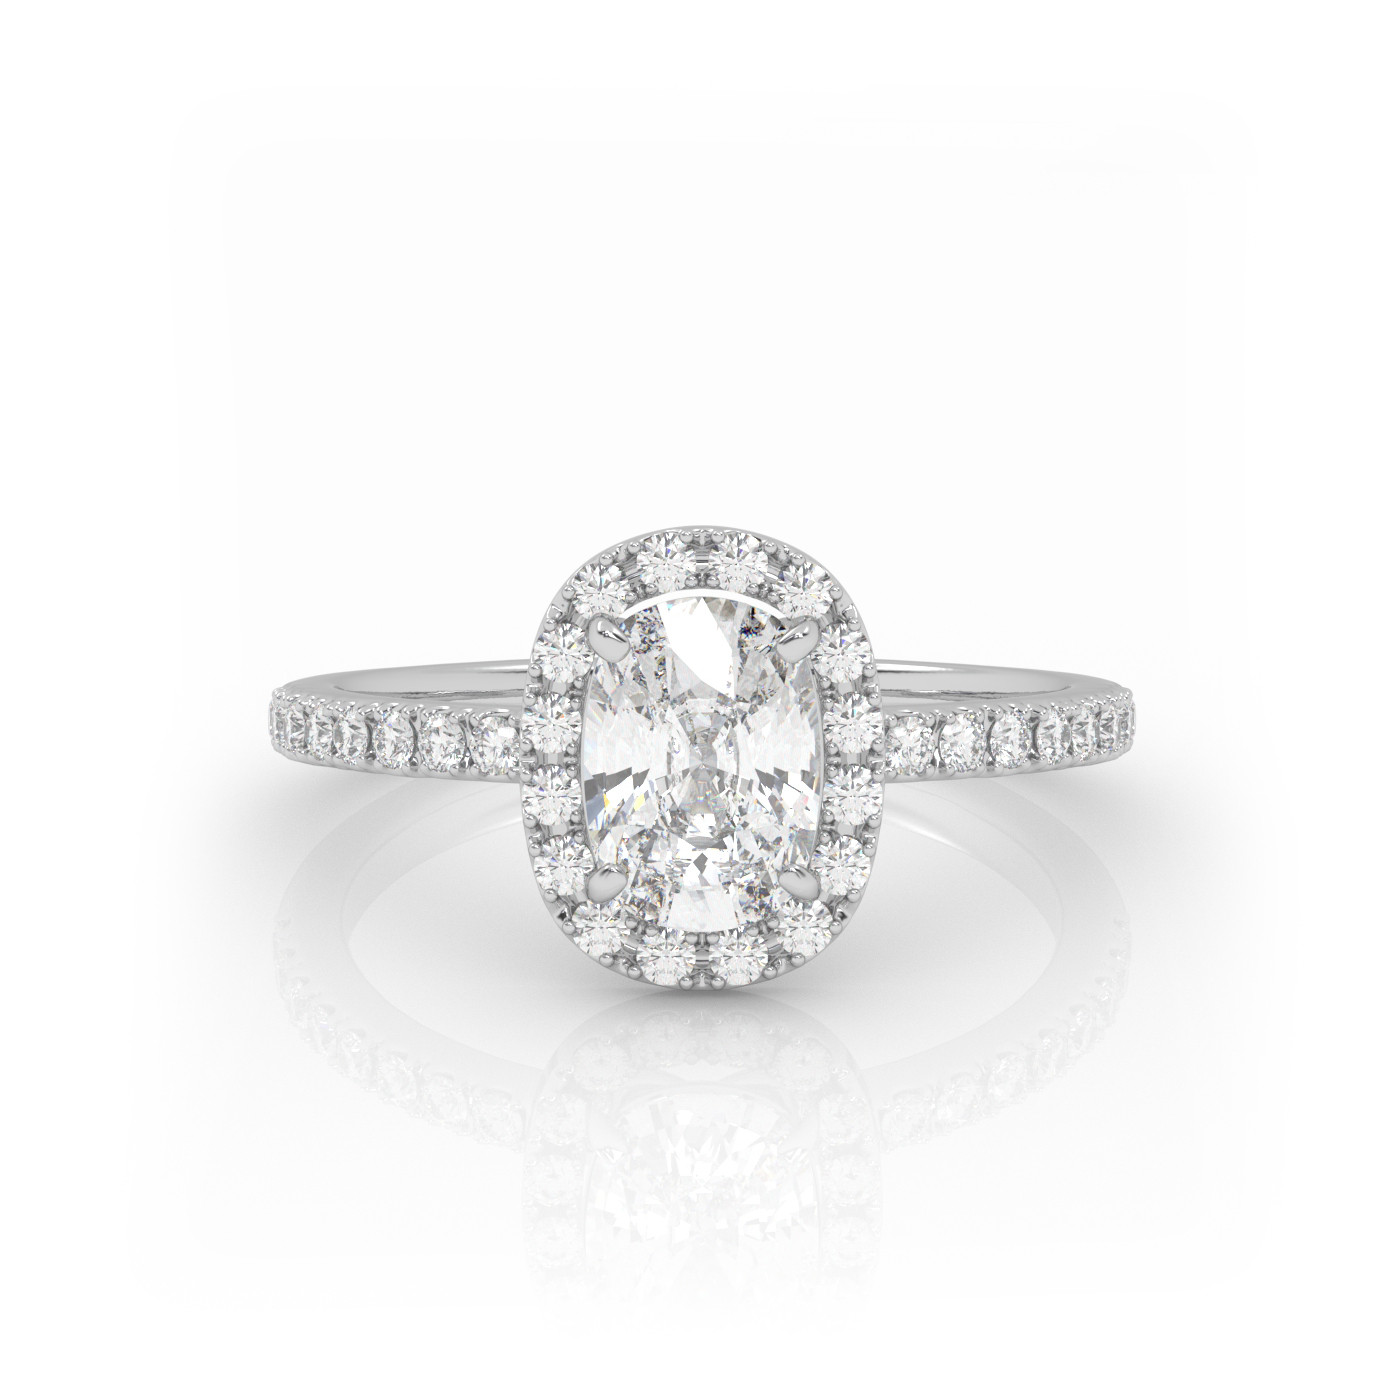 18K WHITE GOLD Elongated Cushion Diamond Engagement Ring With Pave and Halo Style